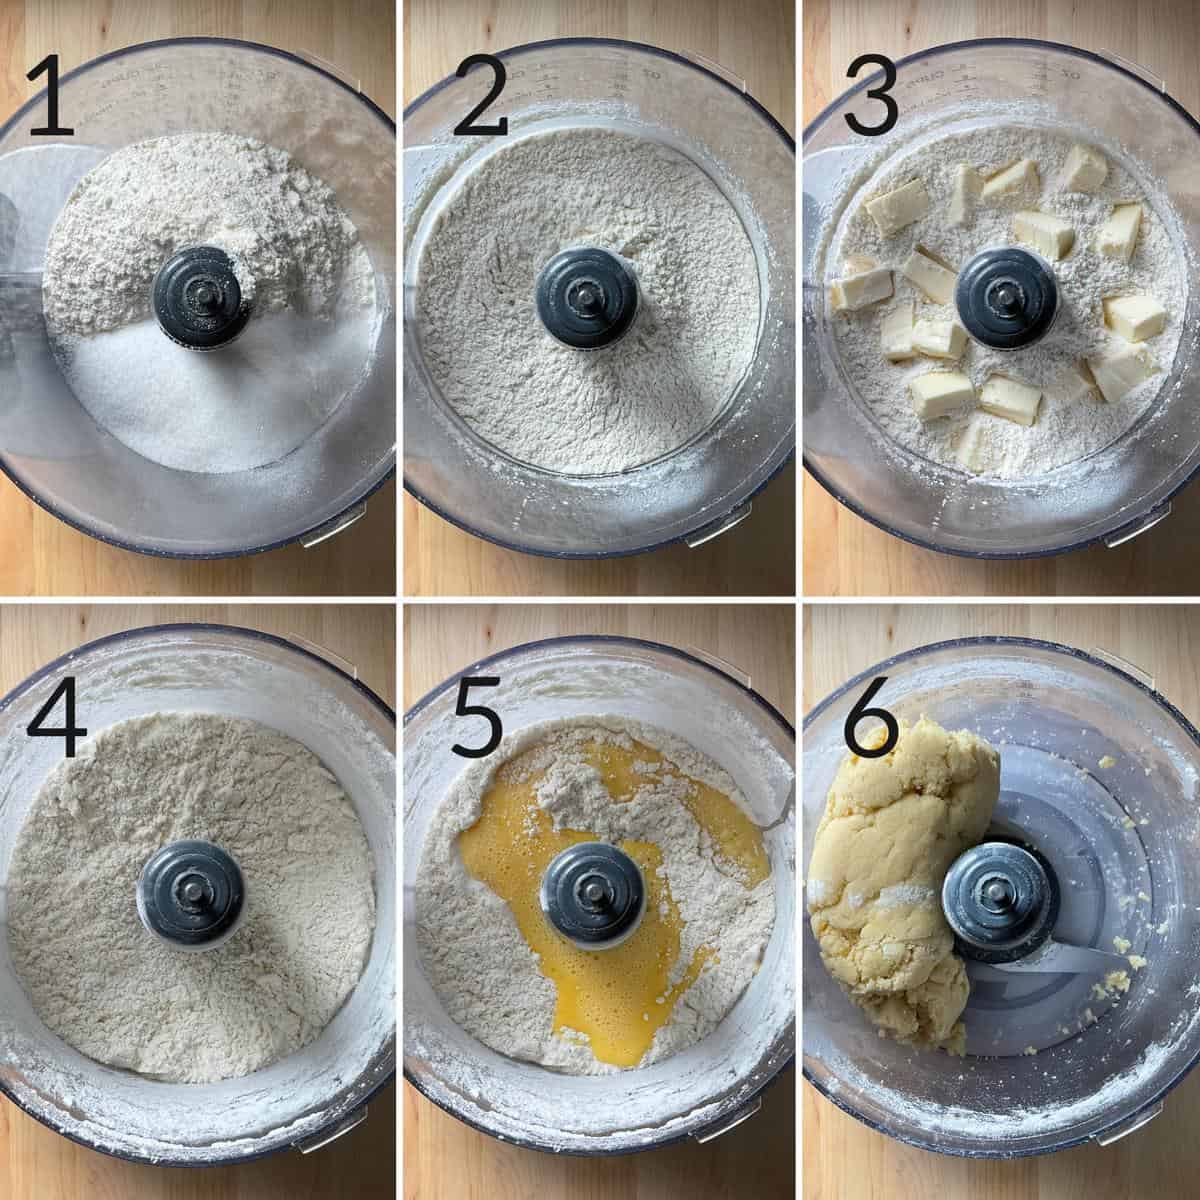 Process shots showing how to make Italian shortcrust pastry in a food processor.